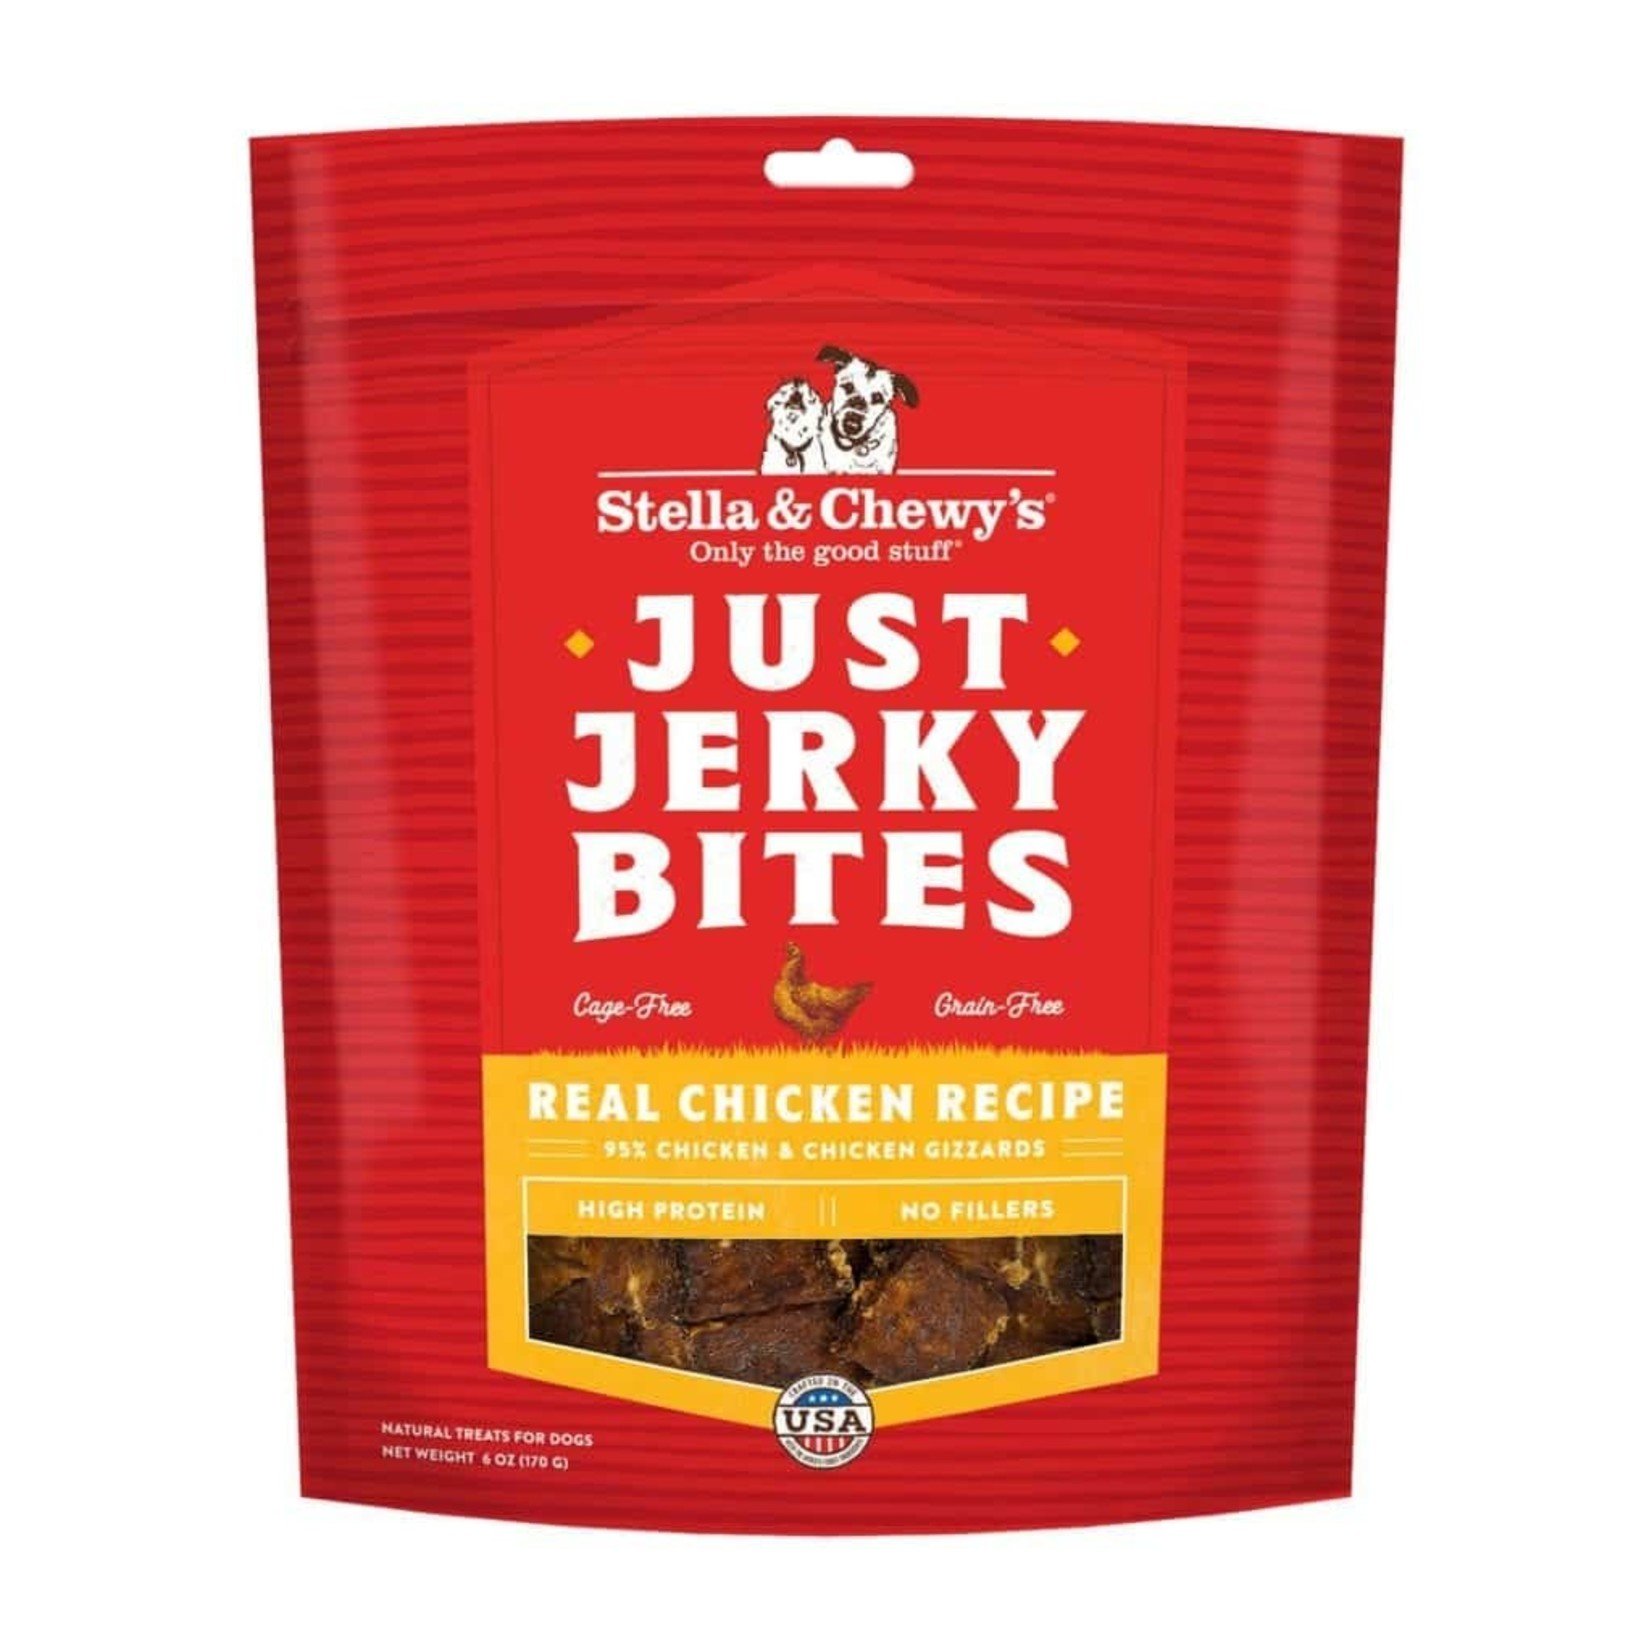 Stella & Chewy's Stella & Chewy's Just Jerky Bites